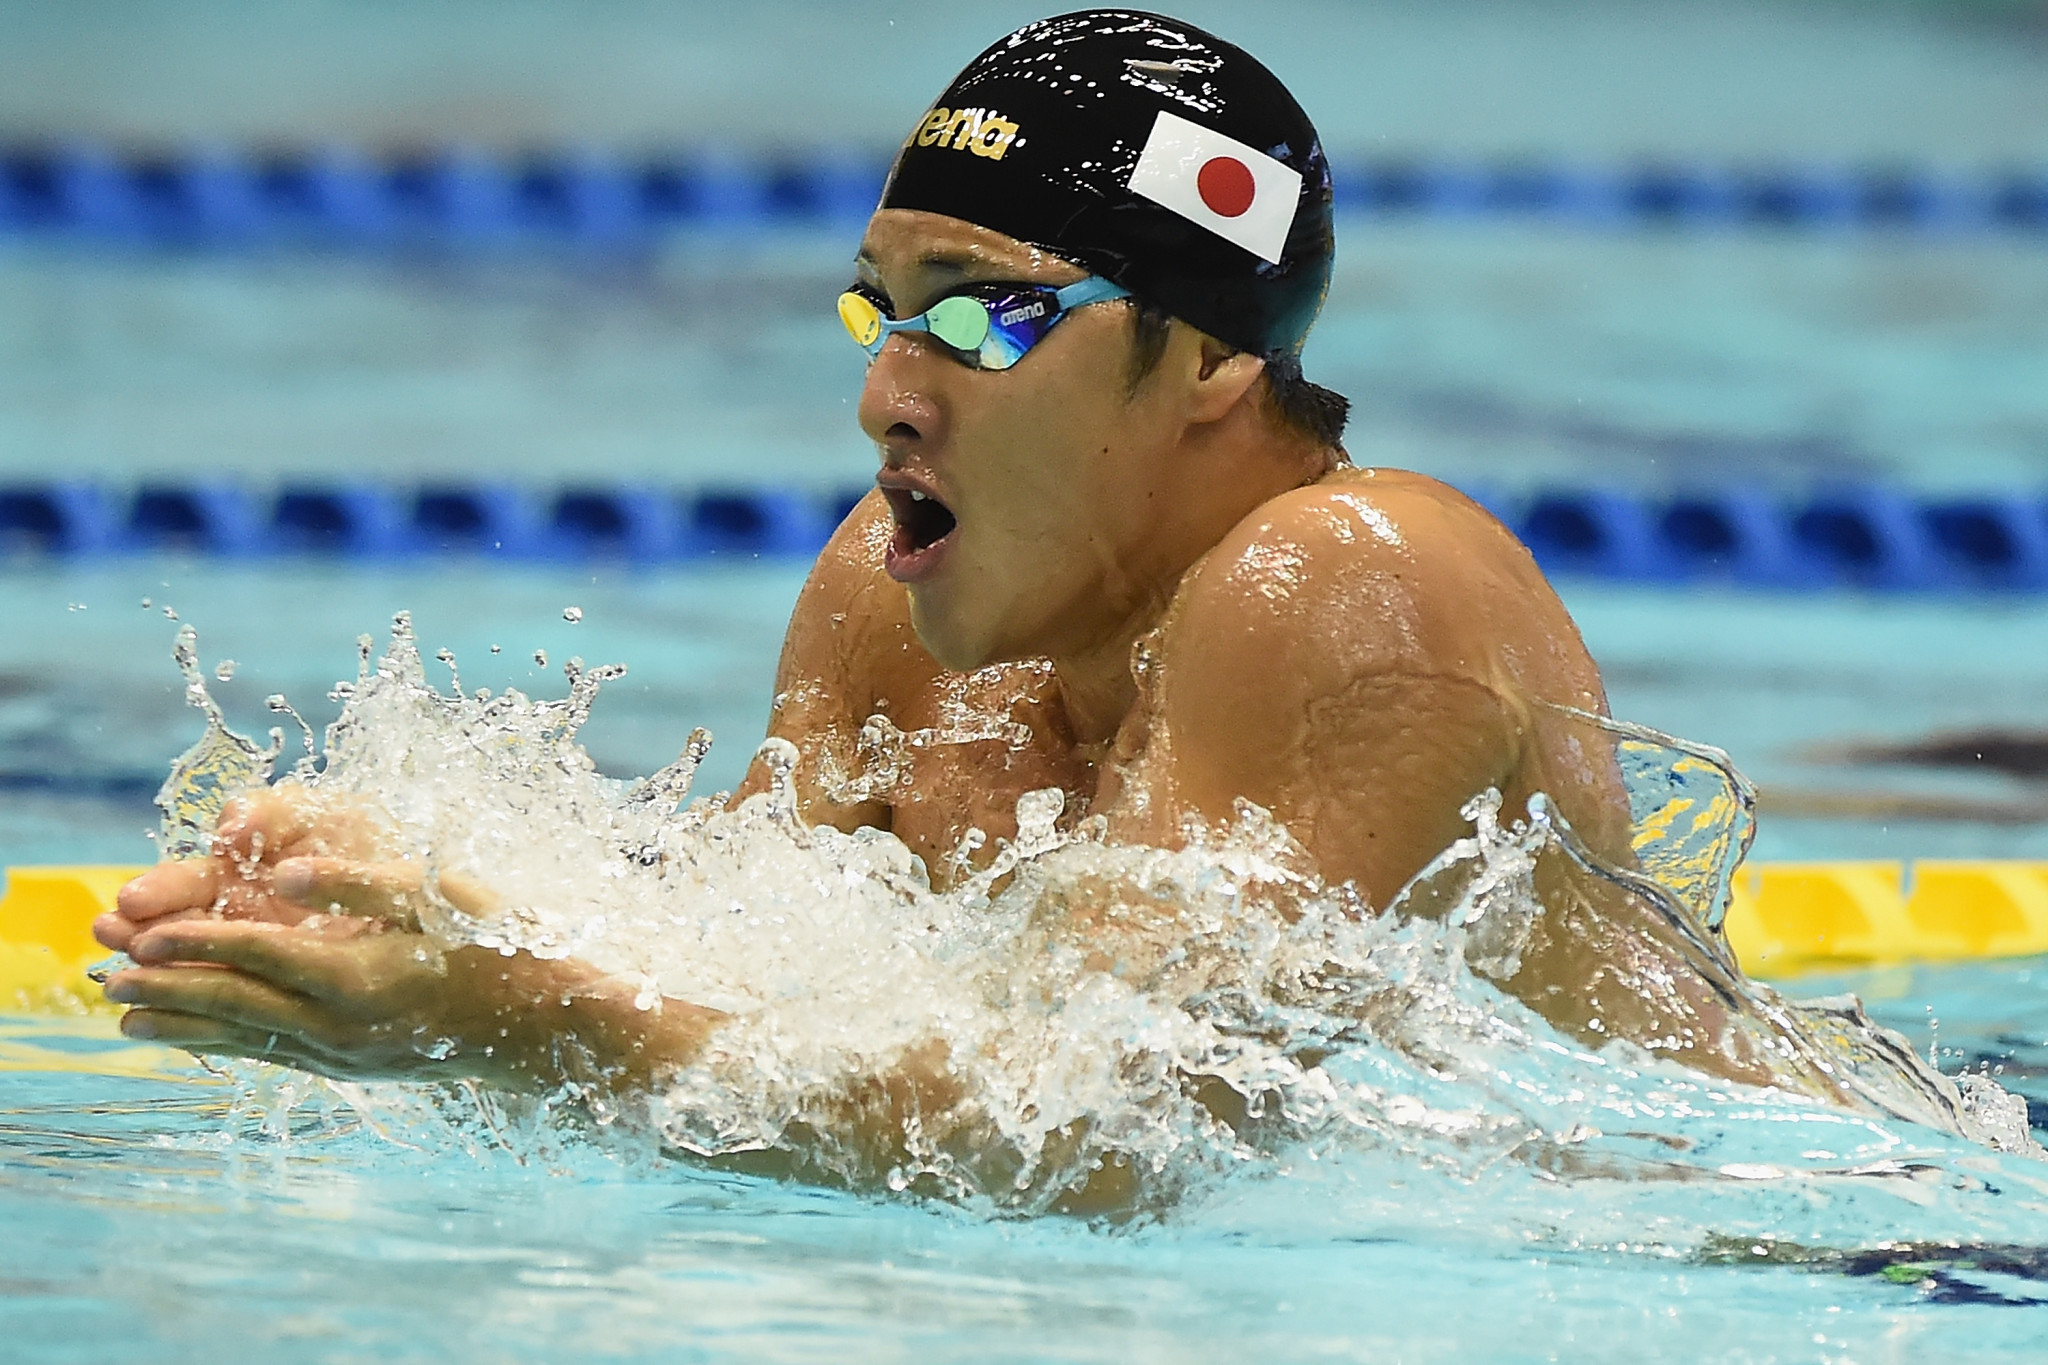 Seto and Ikee dazzle at home FINA World Cup leg in Tokyo